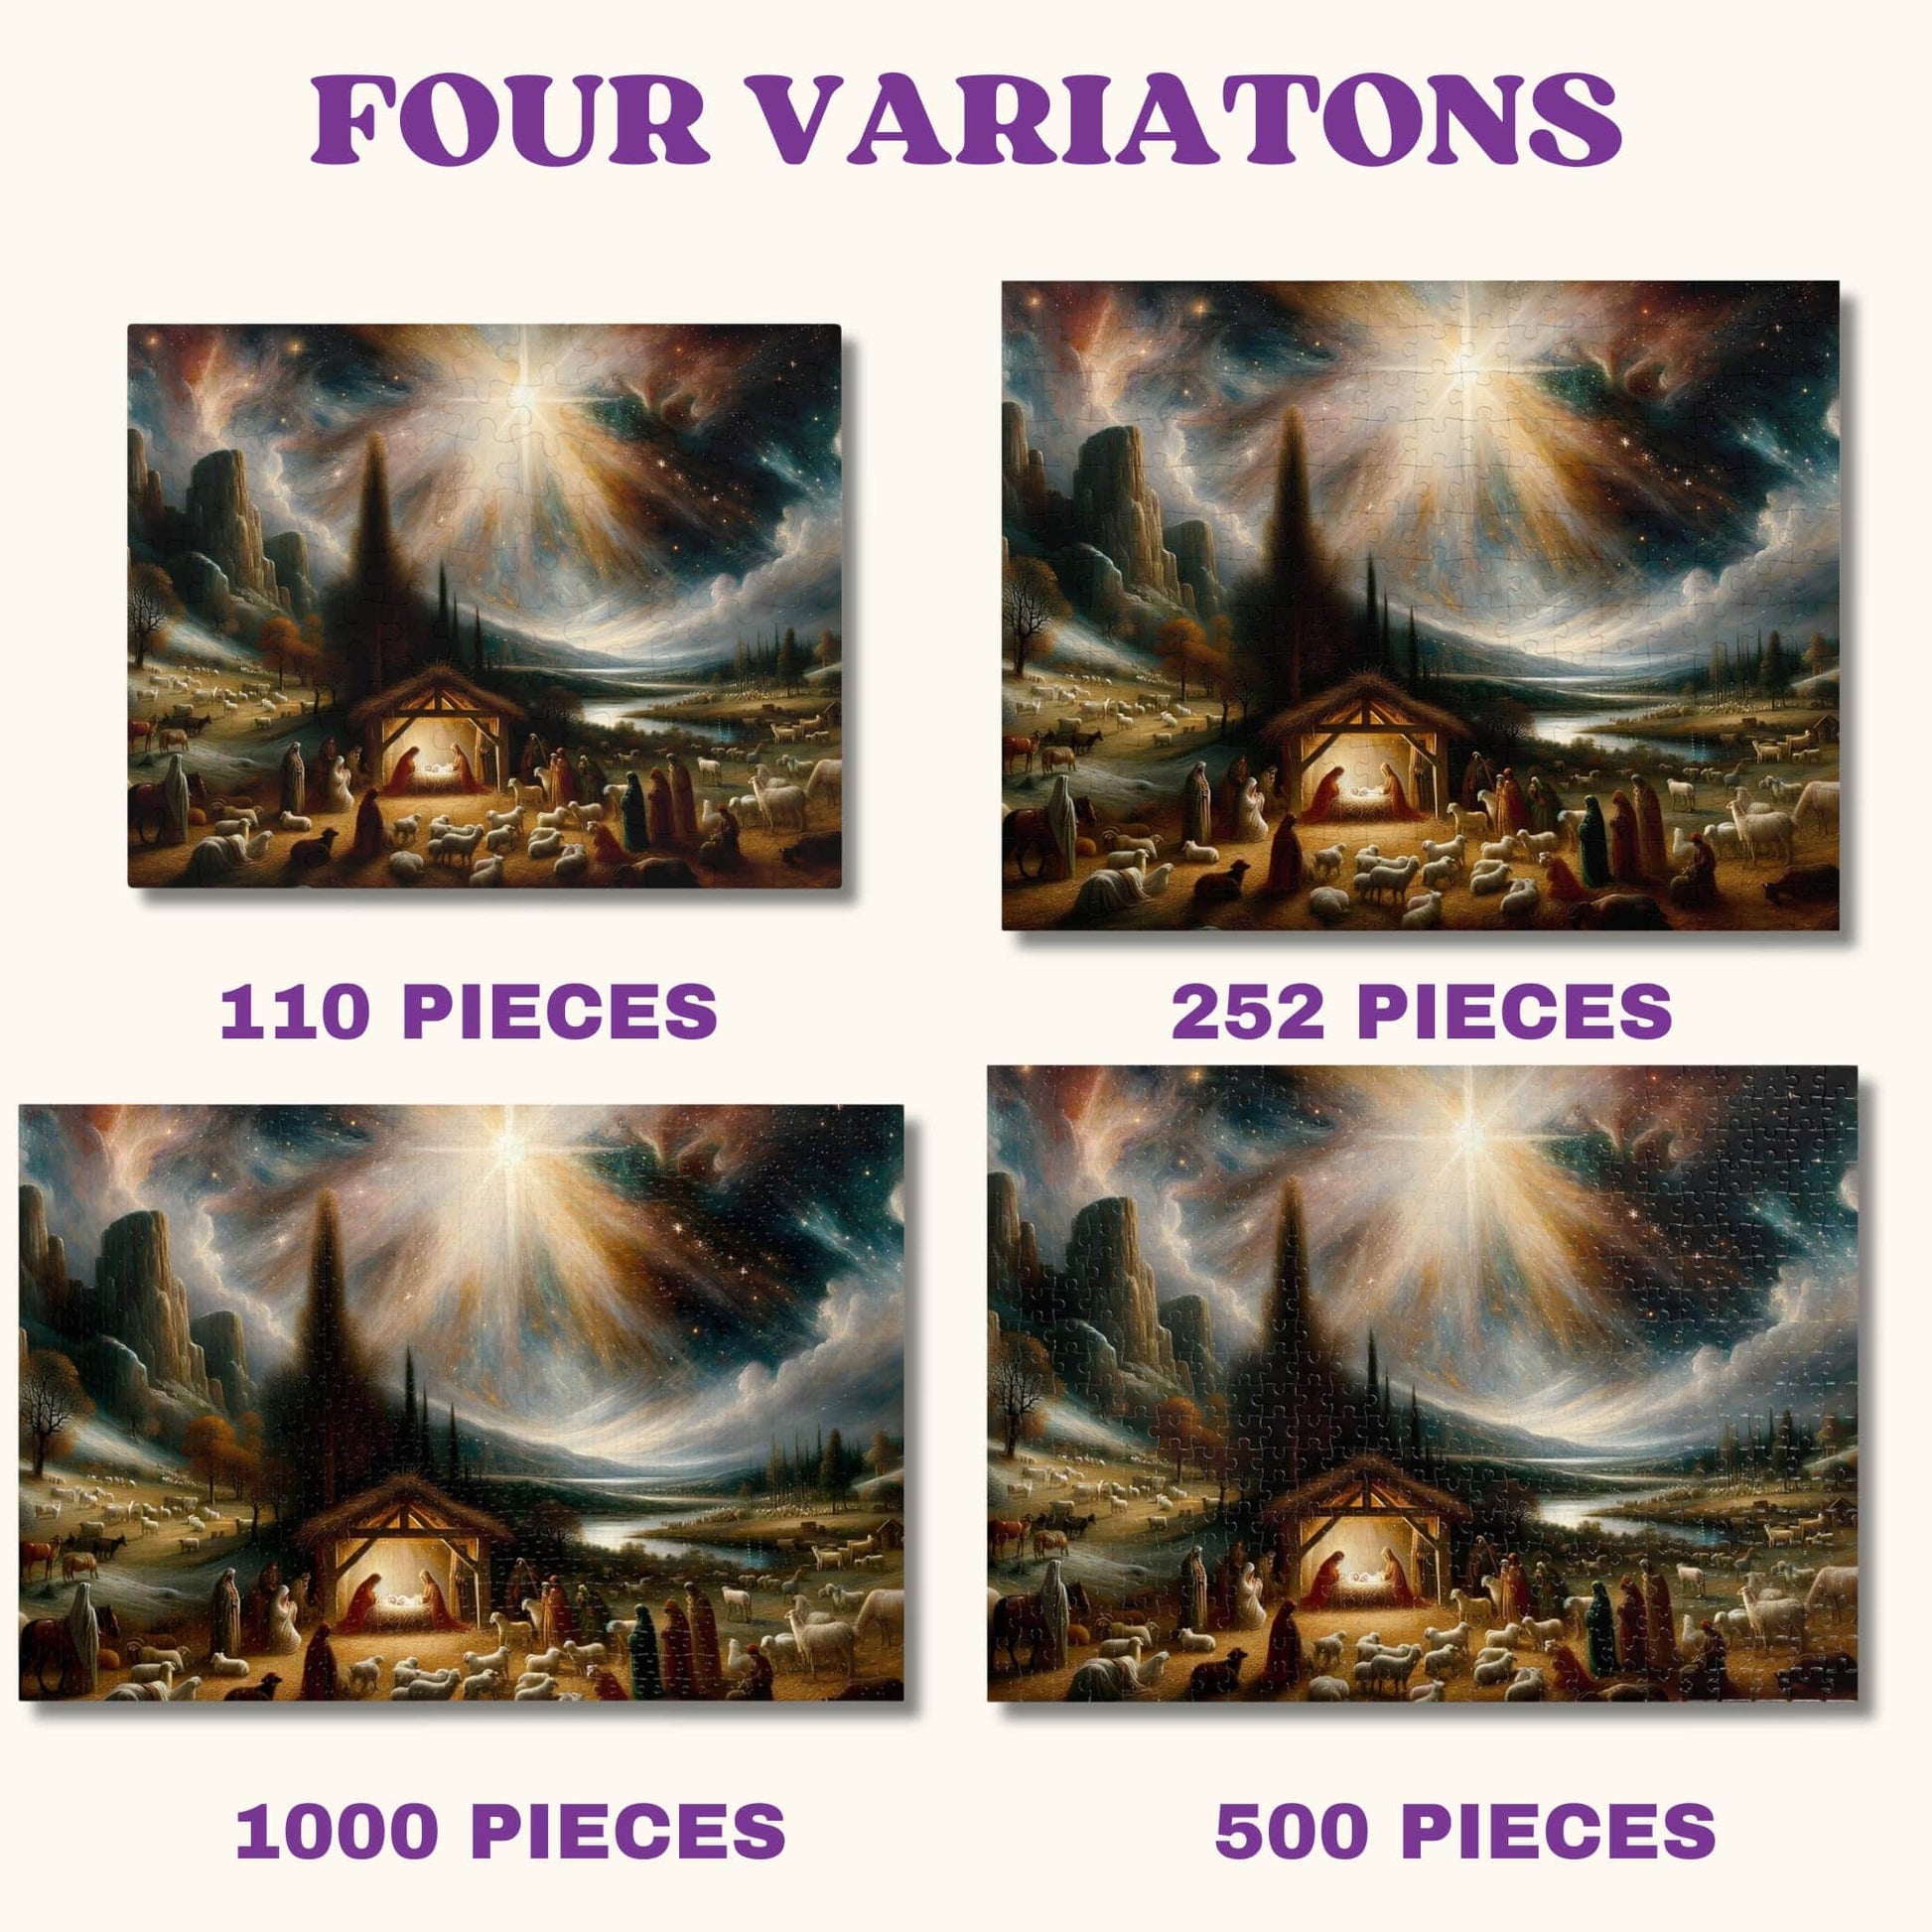 Variations of the Oil-Painted Nativity Scene Jigsaw Puzzles showcasing different sizes including 110, 252, 500, and 1000 pieces.